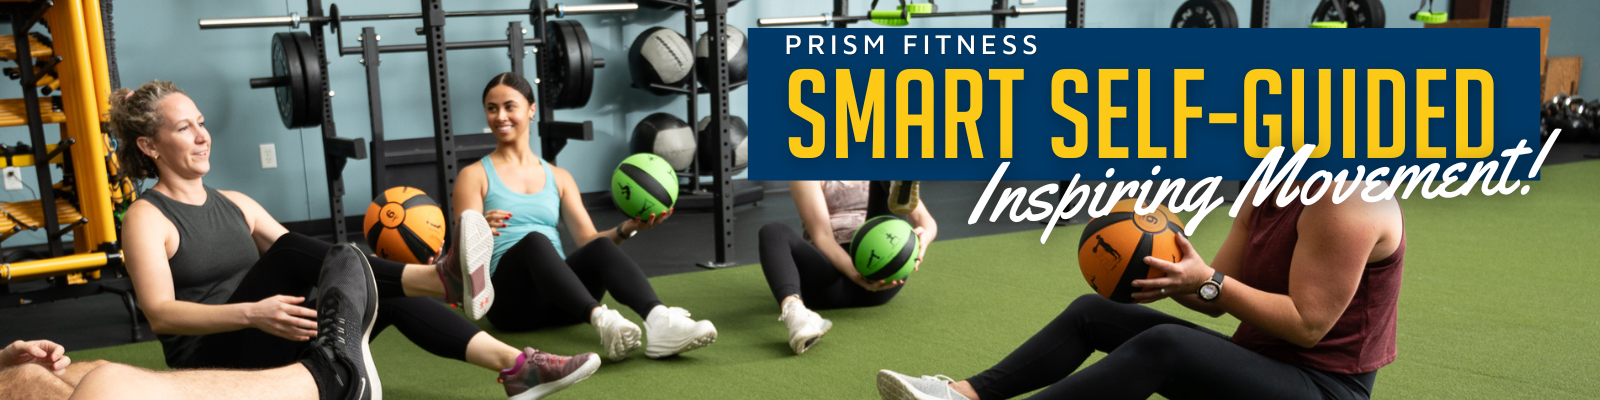 Prism Fitness Inspiring Movement through exercise